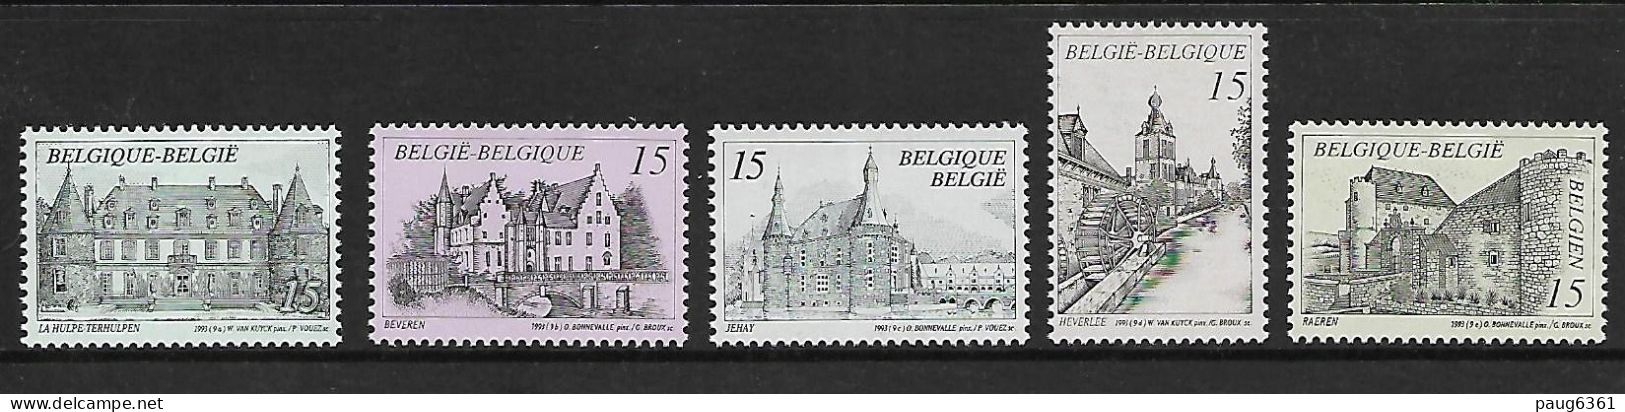 BELGIQUE 1993 SERIE TOURISTIQUE  YVERT N°2512/2516 NEUF MNH** - Unused Stamps